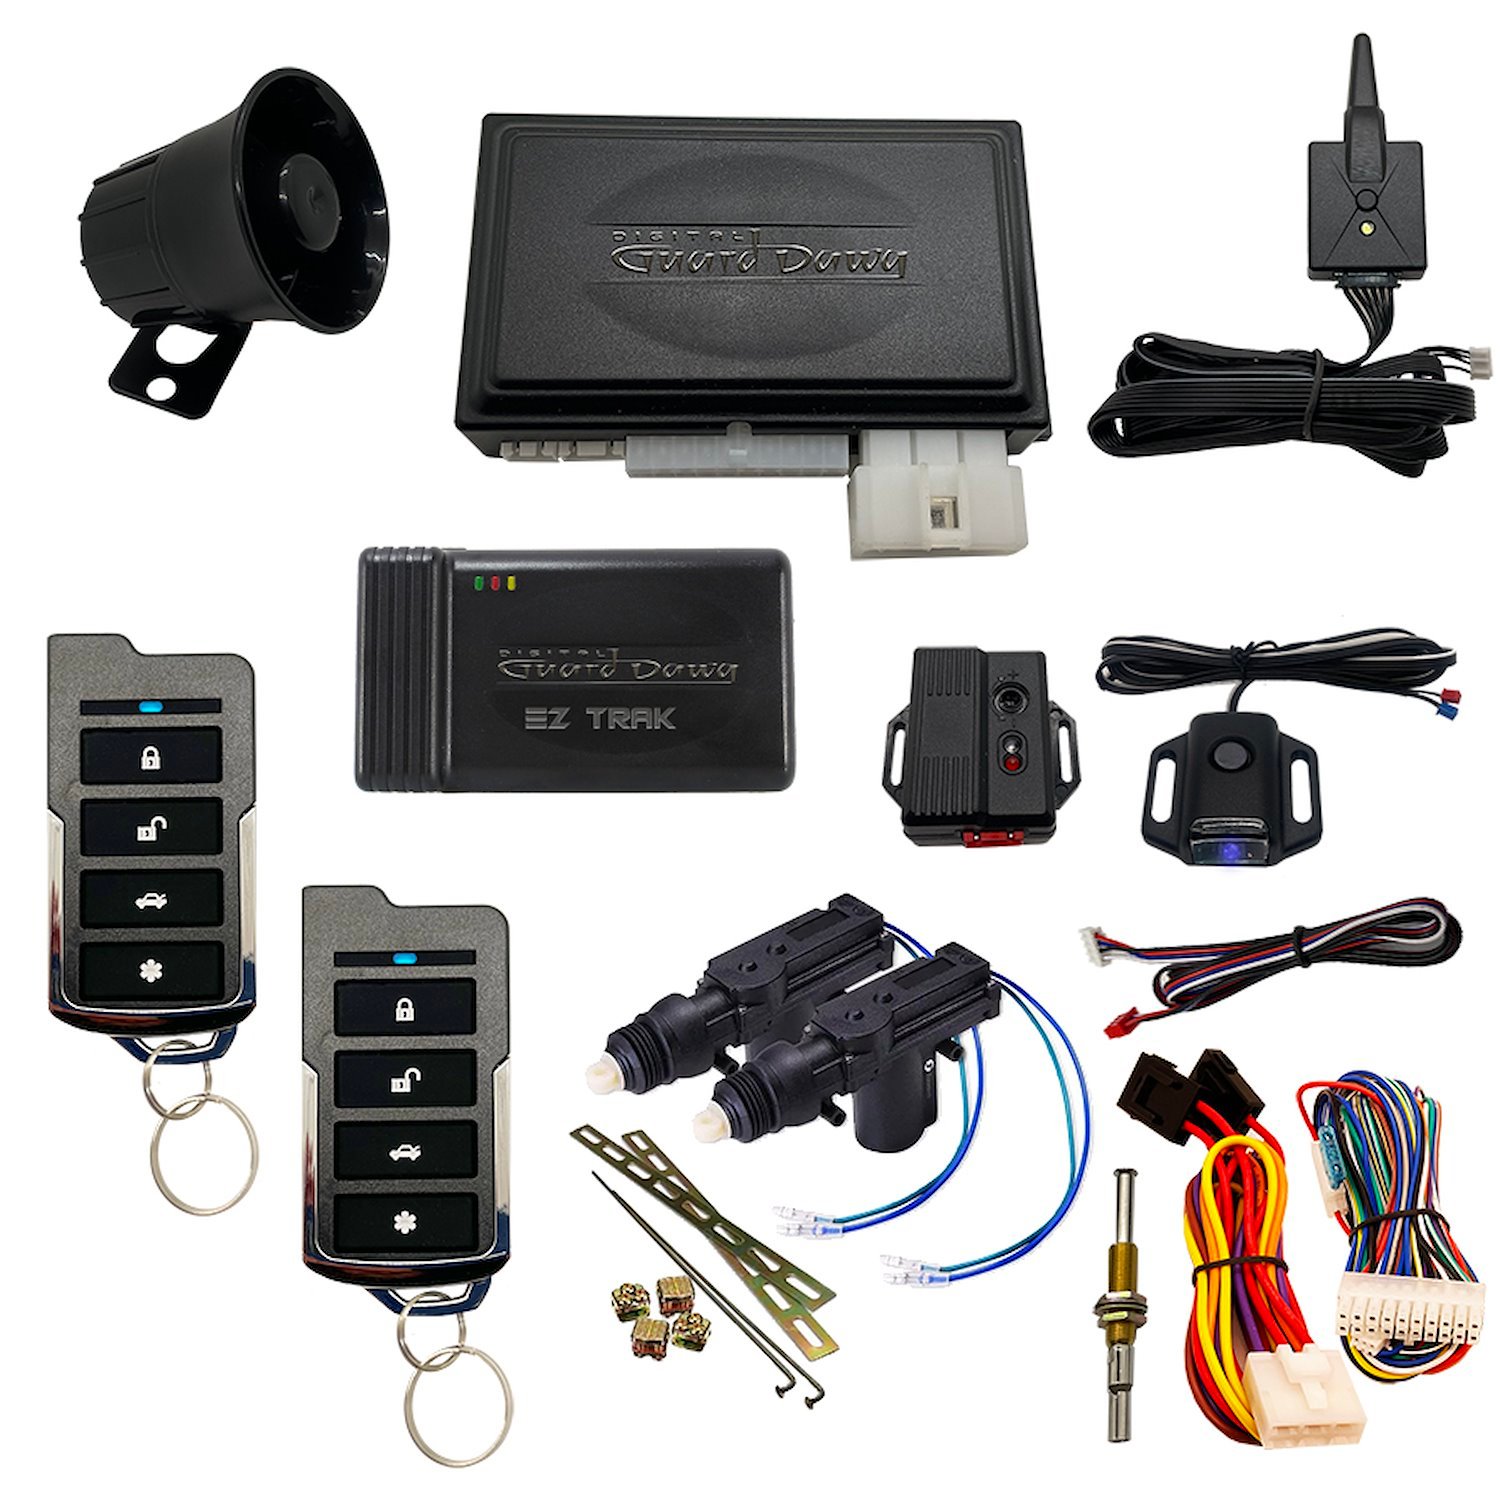 DGD-KY-ALM-RS1-2A-EZ Keyless Entry,Alarm System, and Remote Start, 1-Way, w/2-Door Actuator Kit and Smart Phone EZ-Tracking